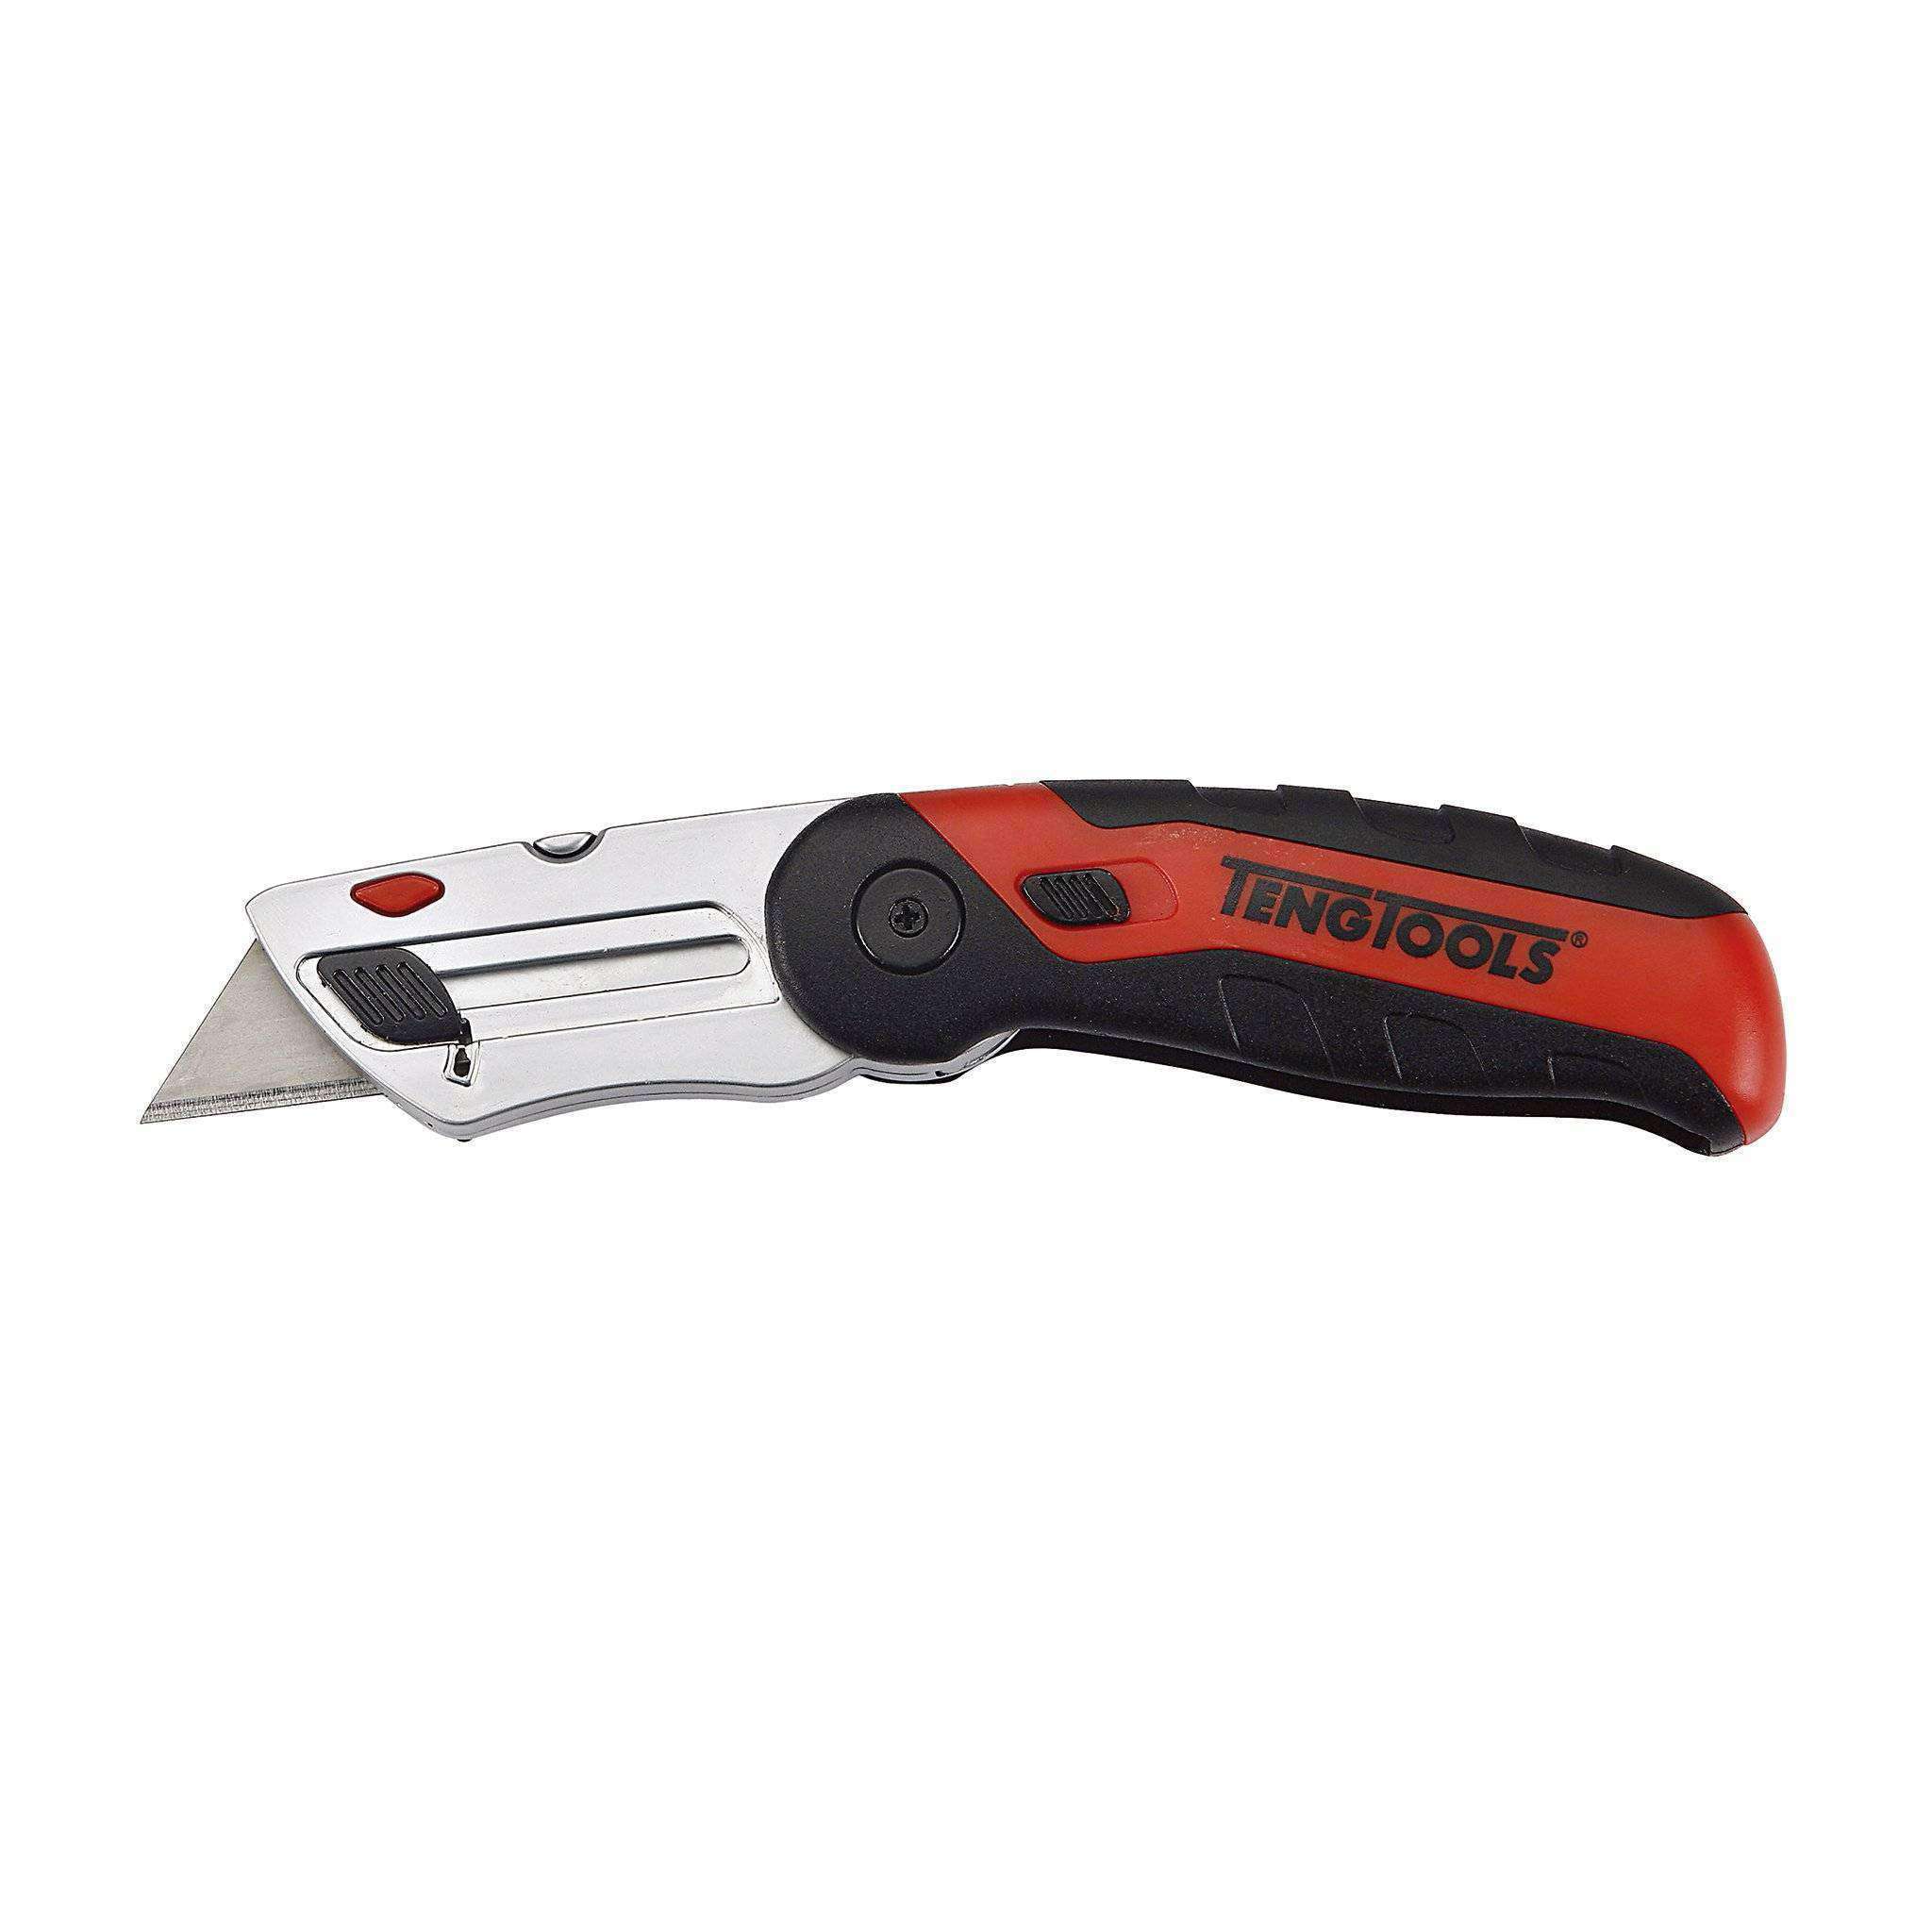 Teng Tools Folding Universal Utility Knife / Box Cutters with Fixed Blade - 712